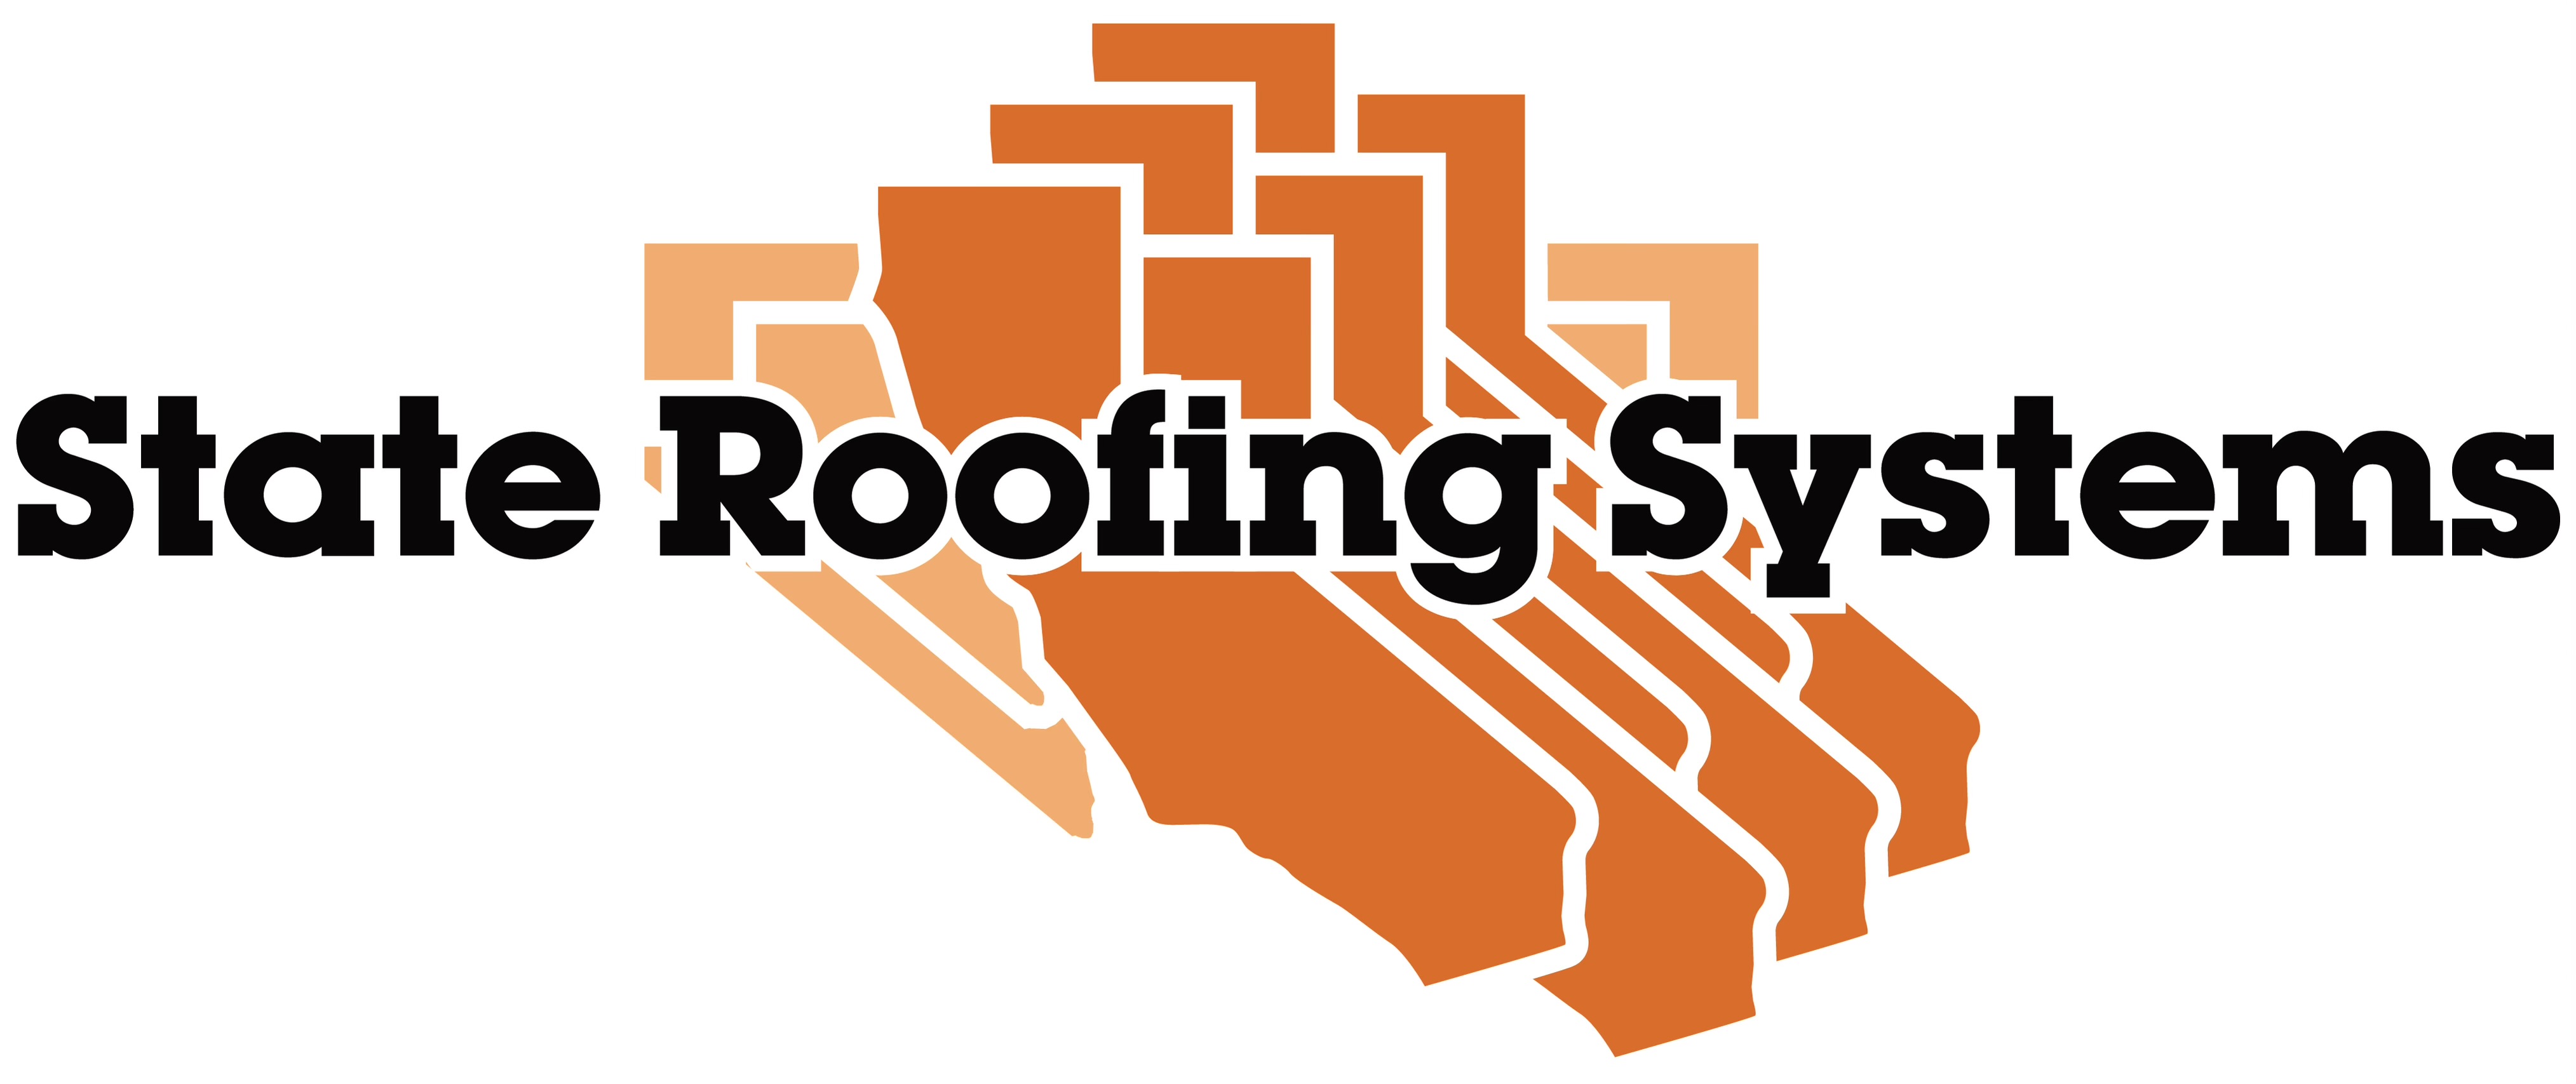 I. State Roofing Systems